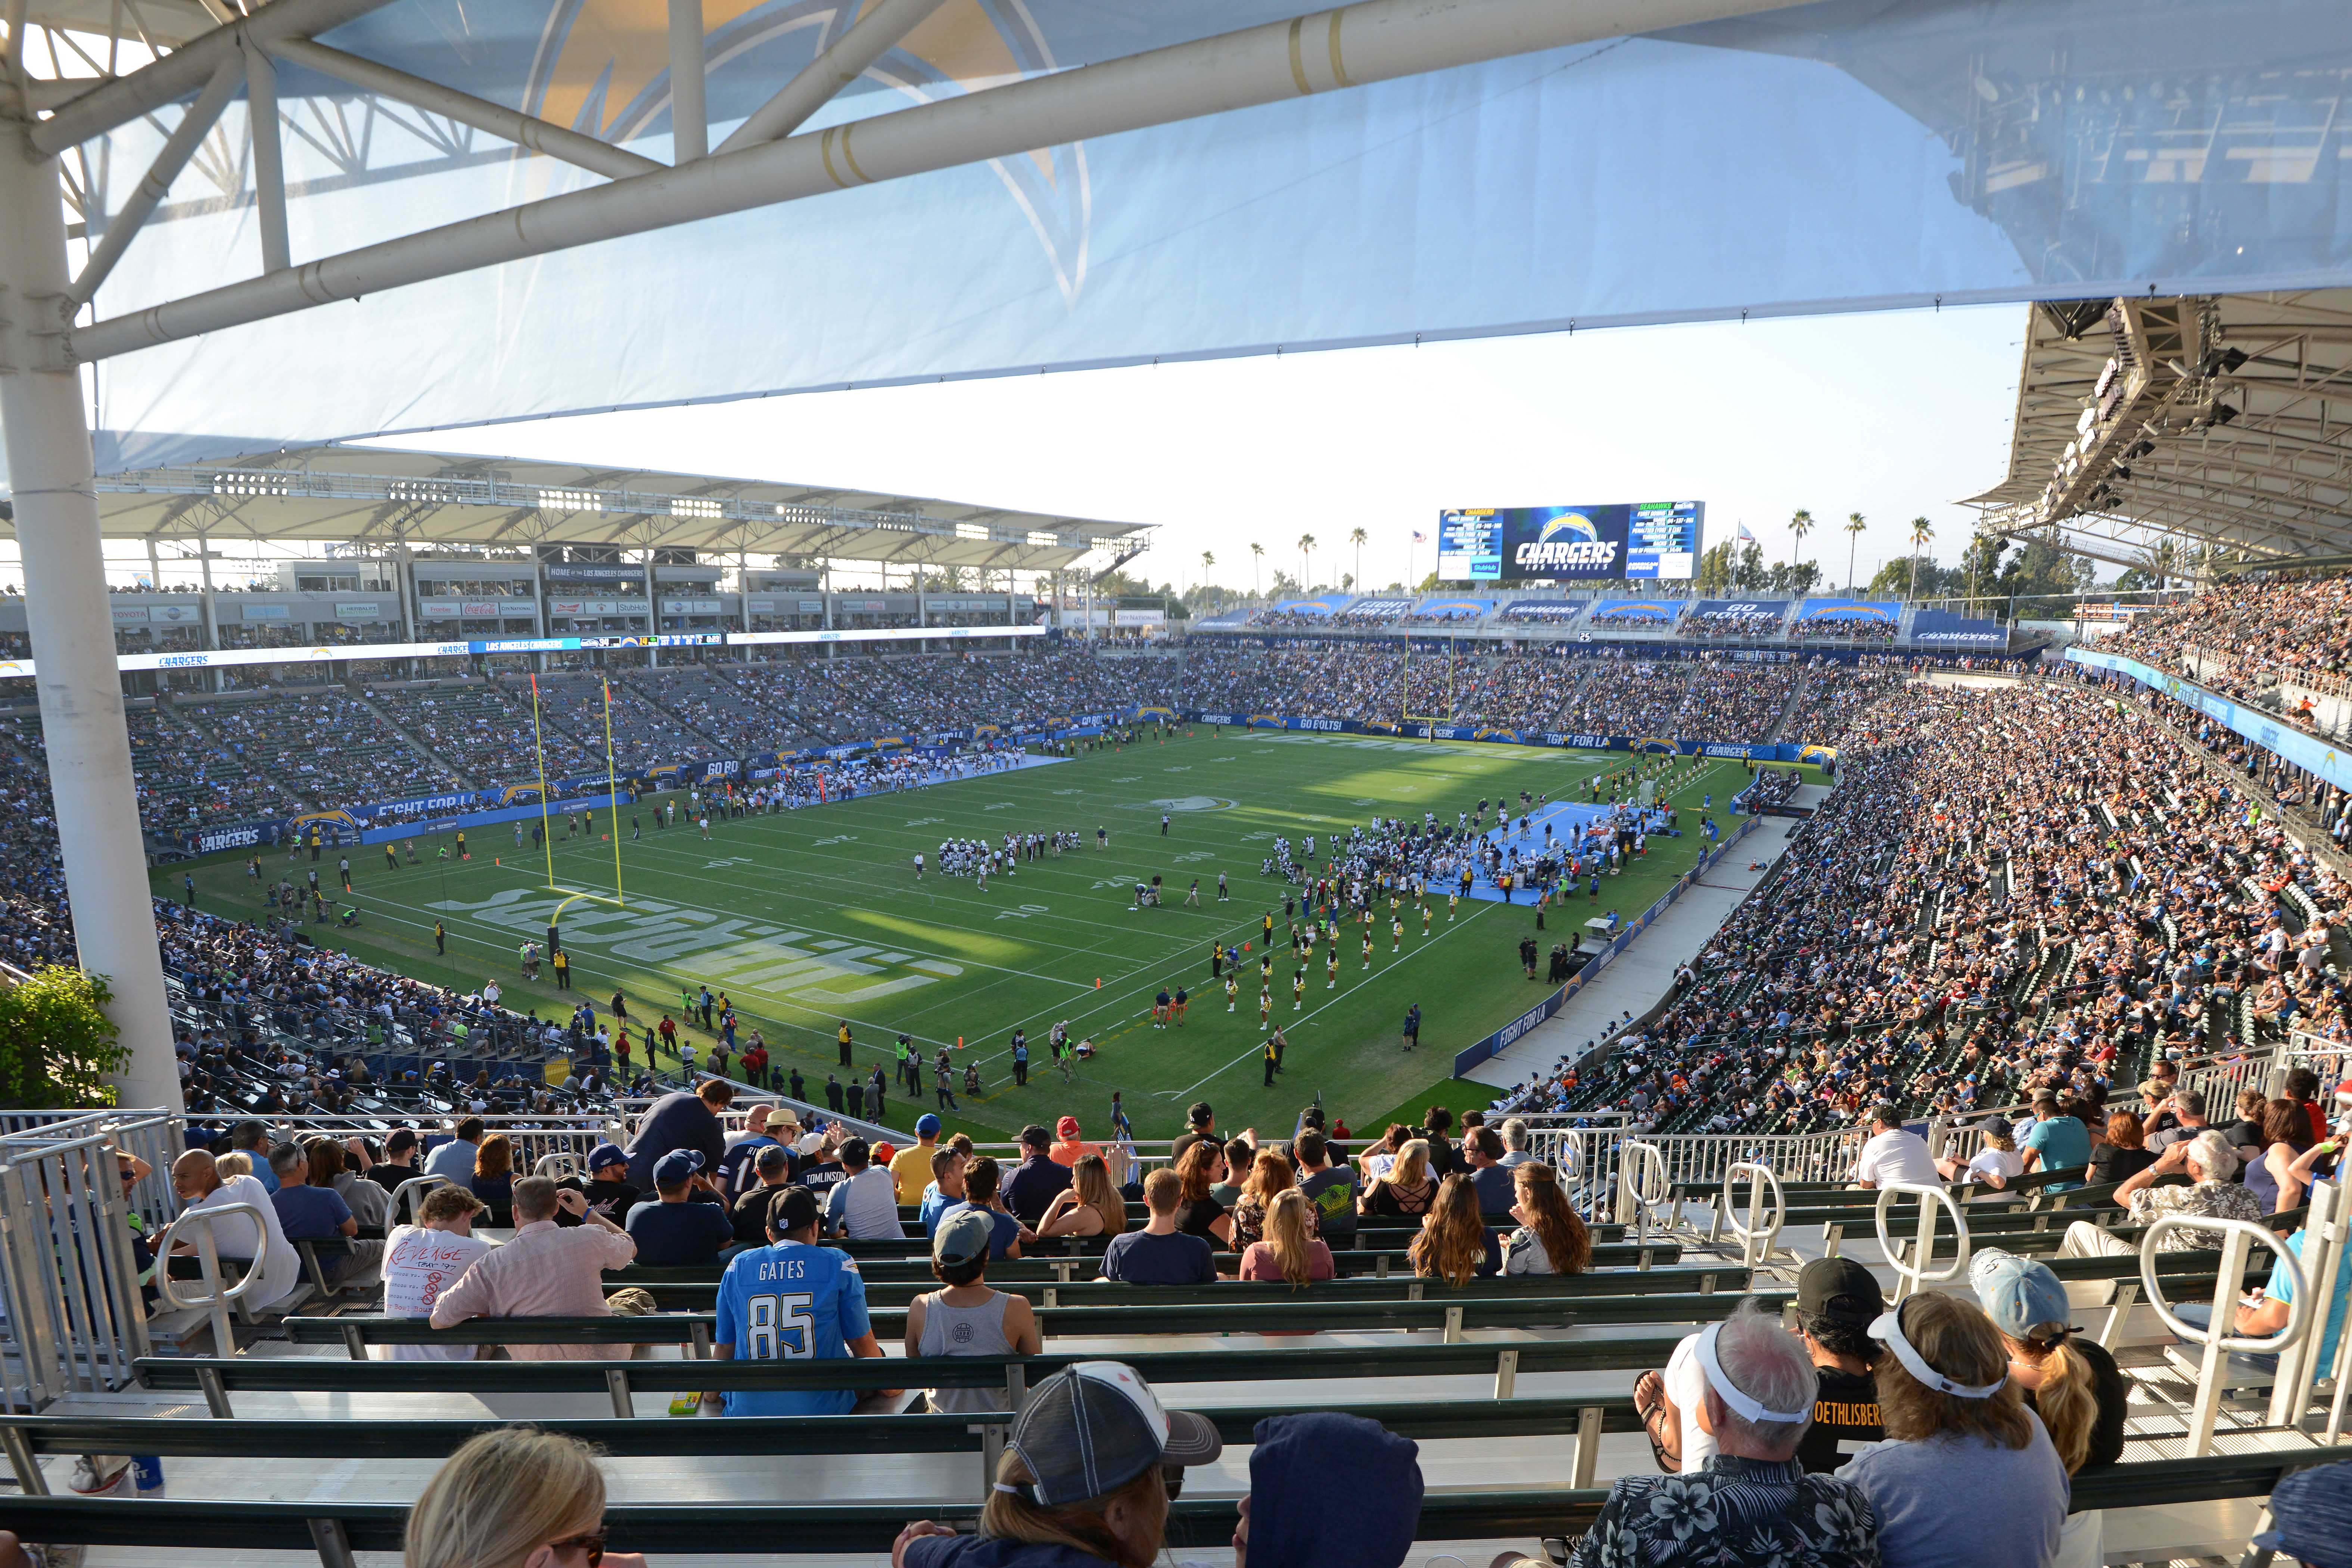 los angeles chargers home schedule